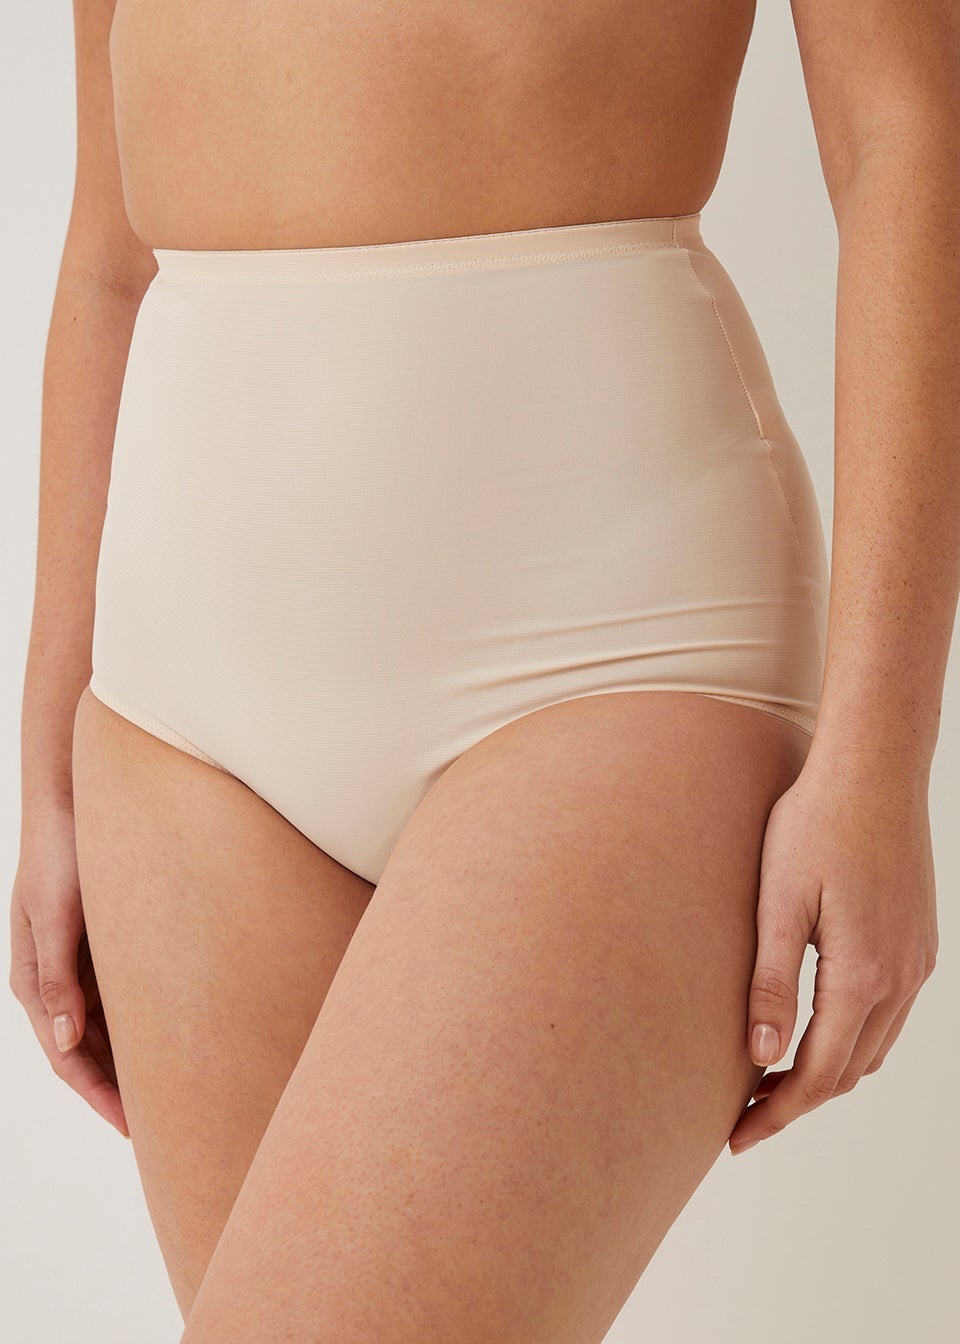 Nude High Waisted Medium Support Control Knickers - Matalan